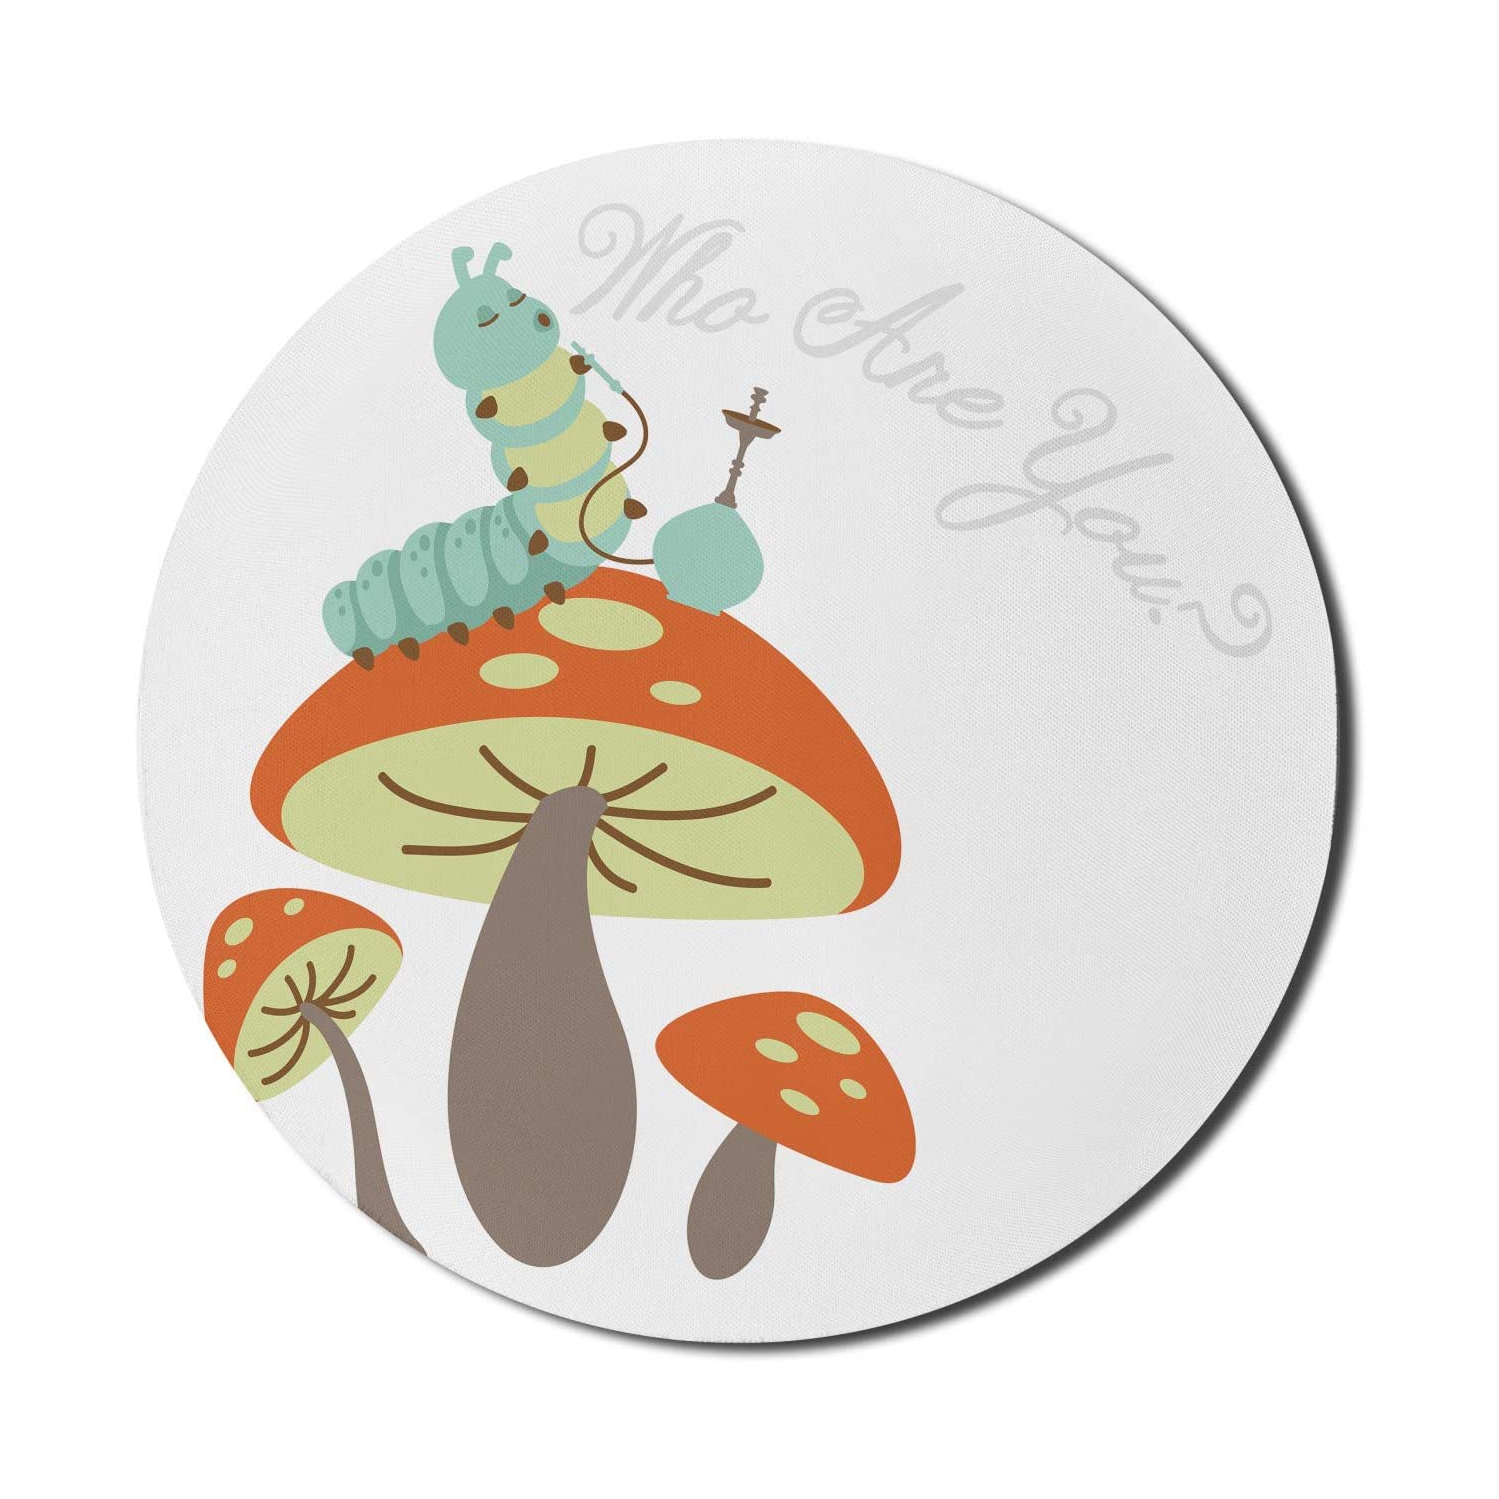 Alice in Wonderland Mouse Pad for Computers, Hookah Smoking Caterpillar Sitting on a Mushroom and Asking Who